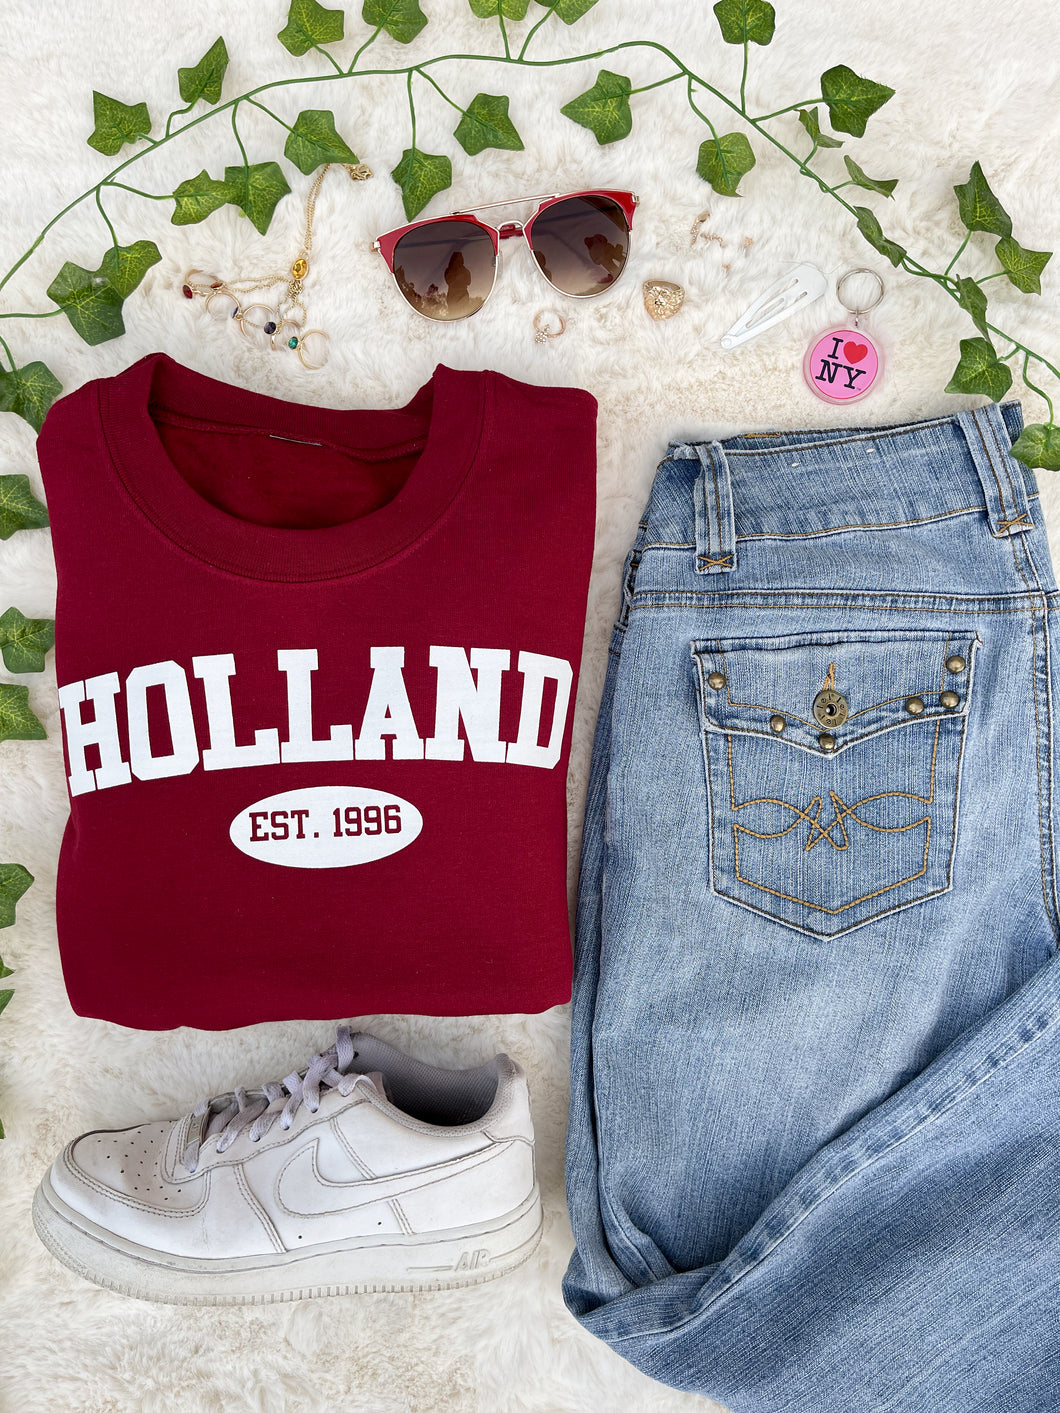 The Holland Sweater.